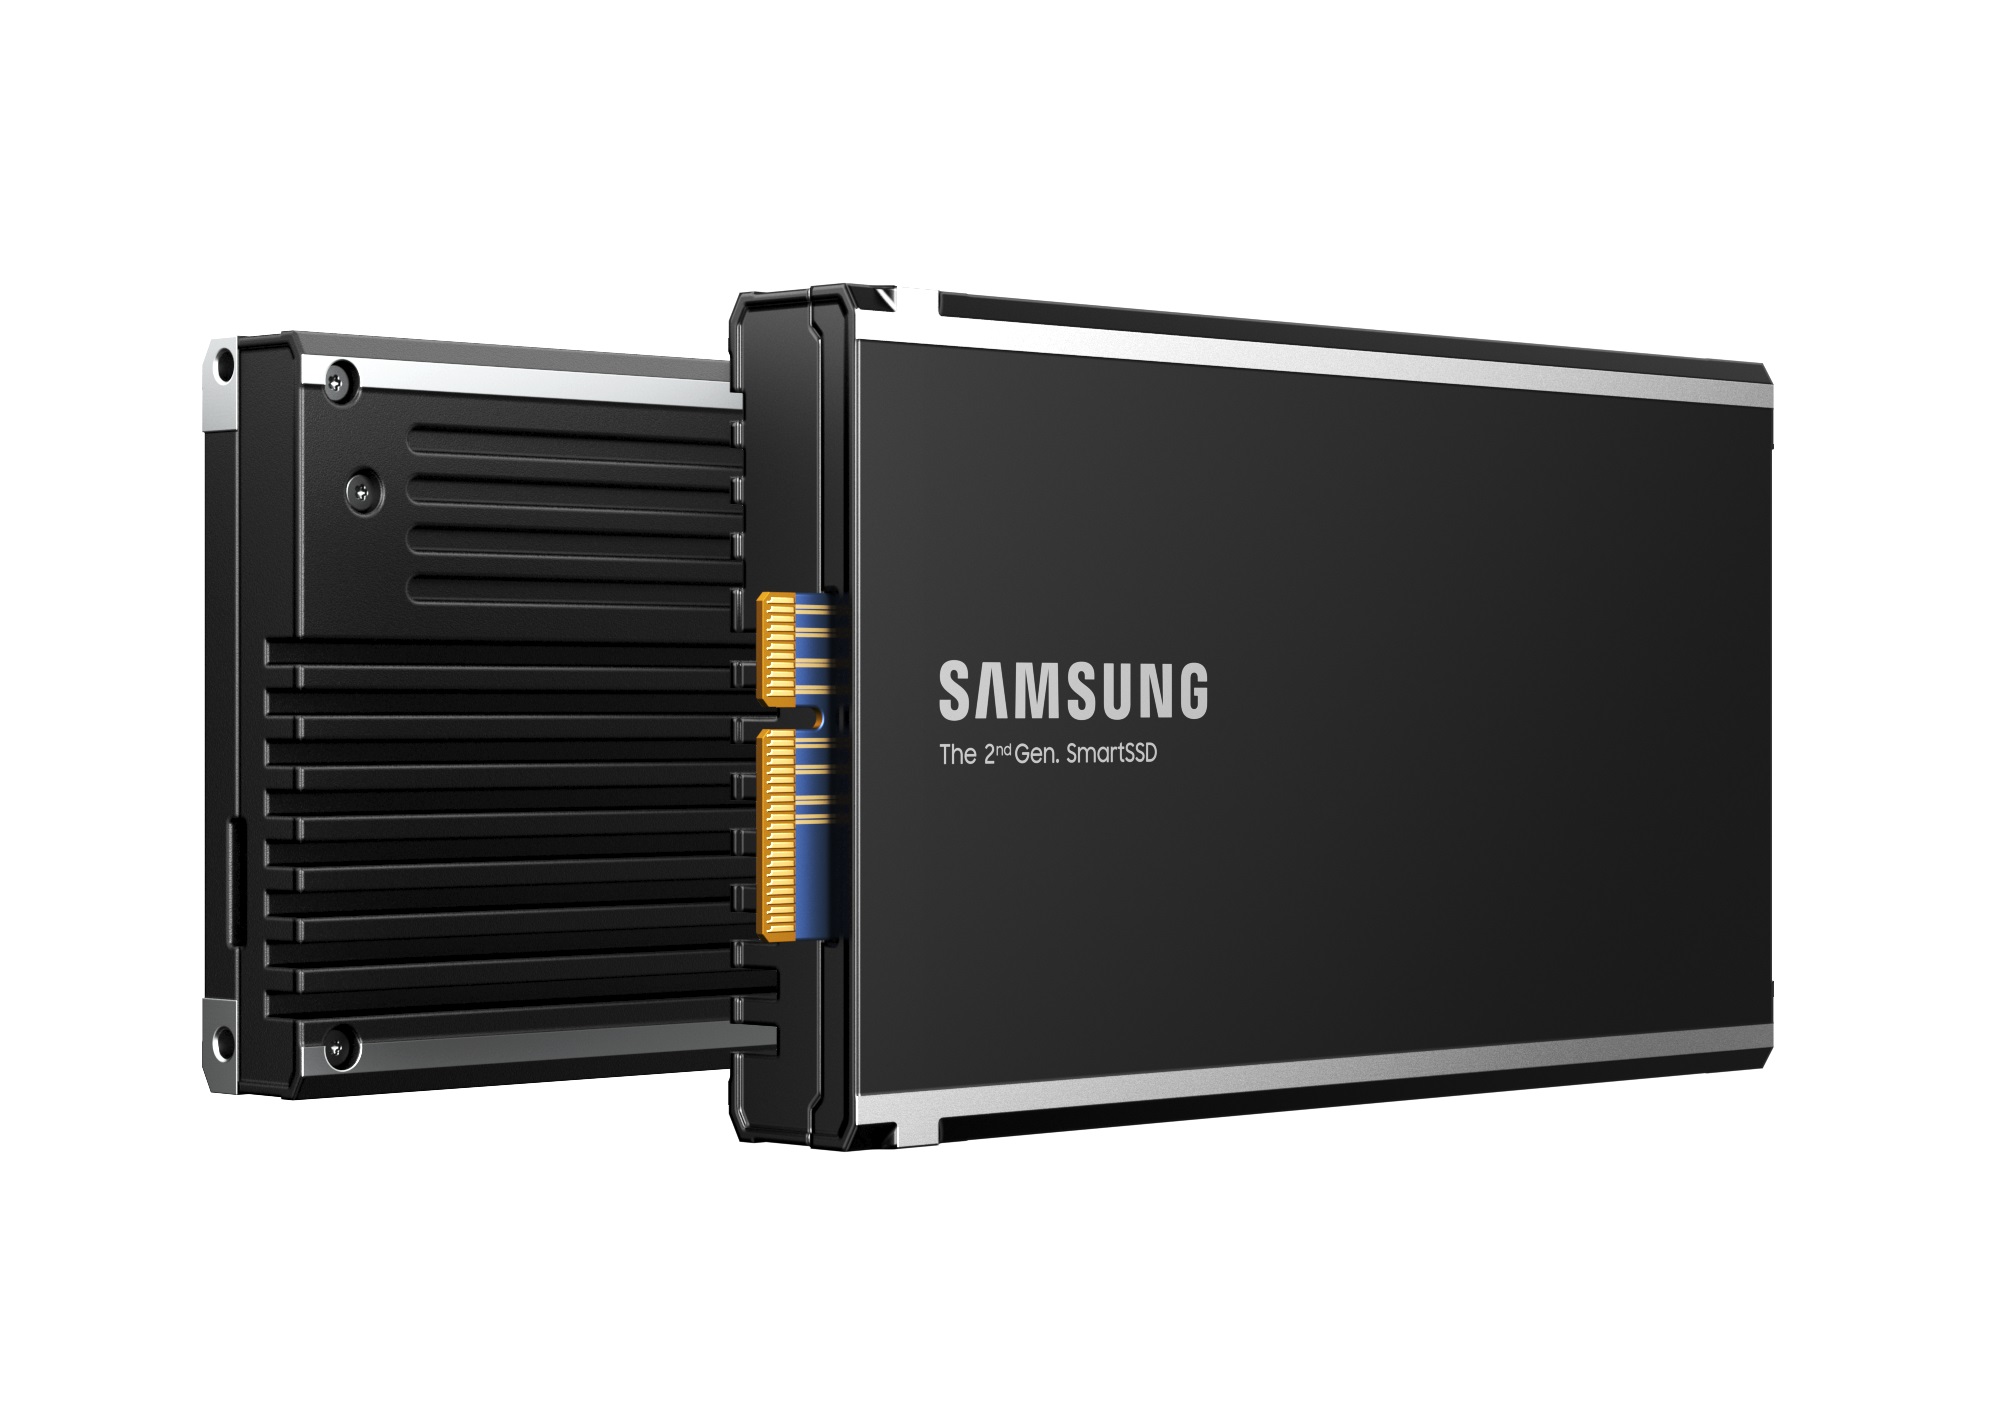 Samsung’s new SmartSSD boasts up to 50% faster processing times